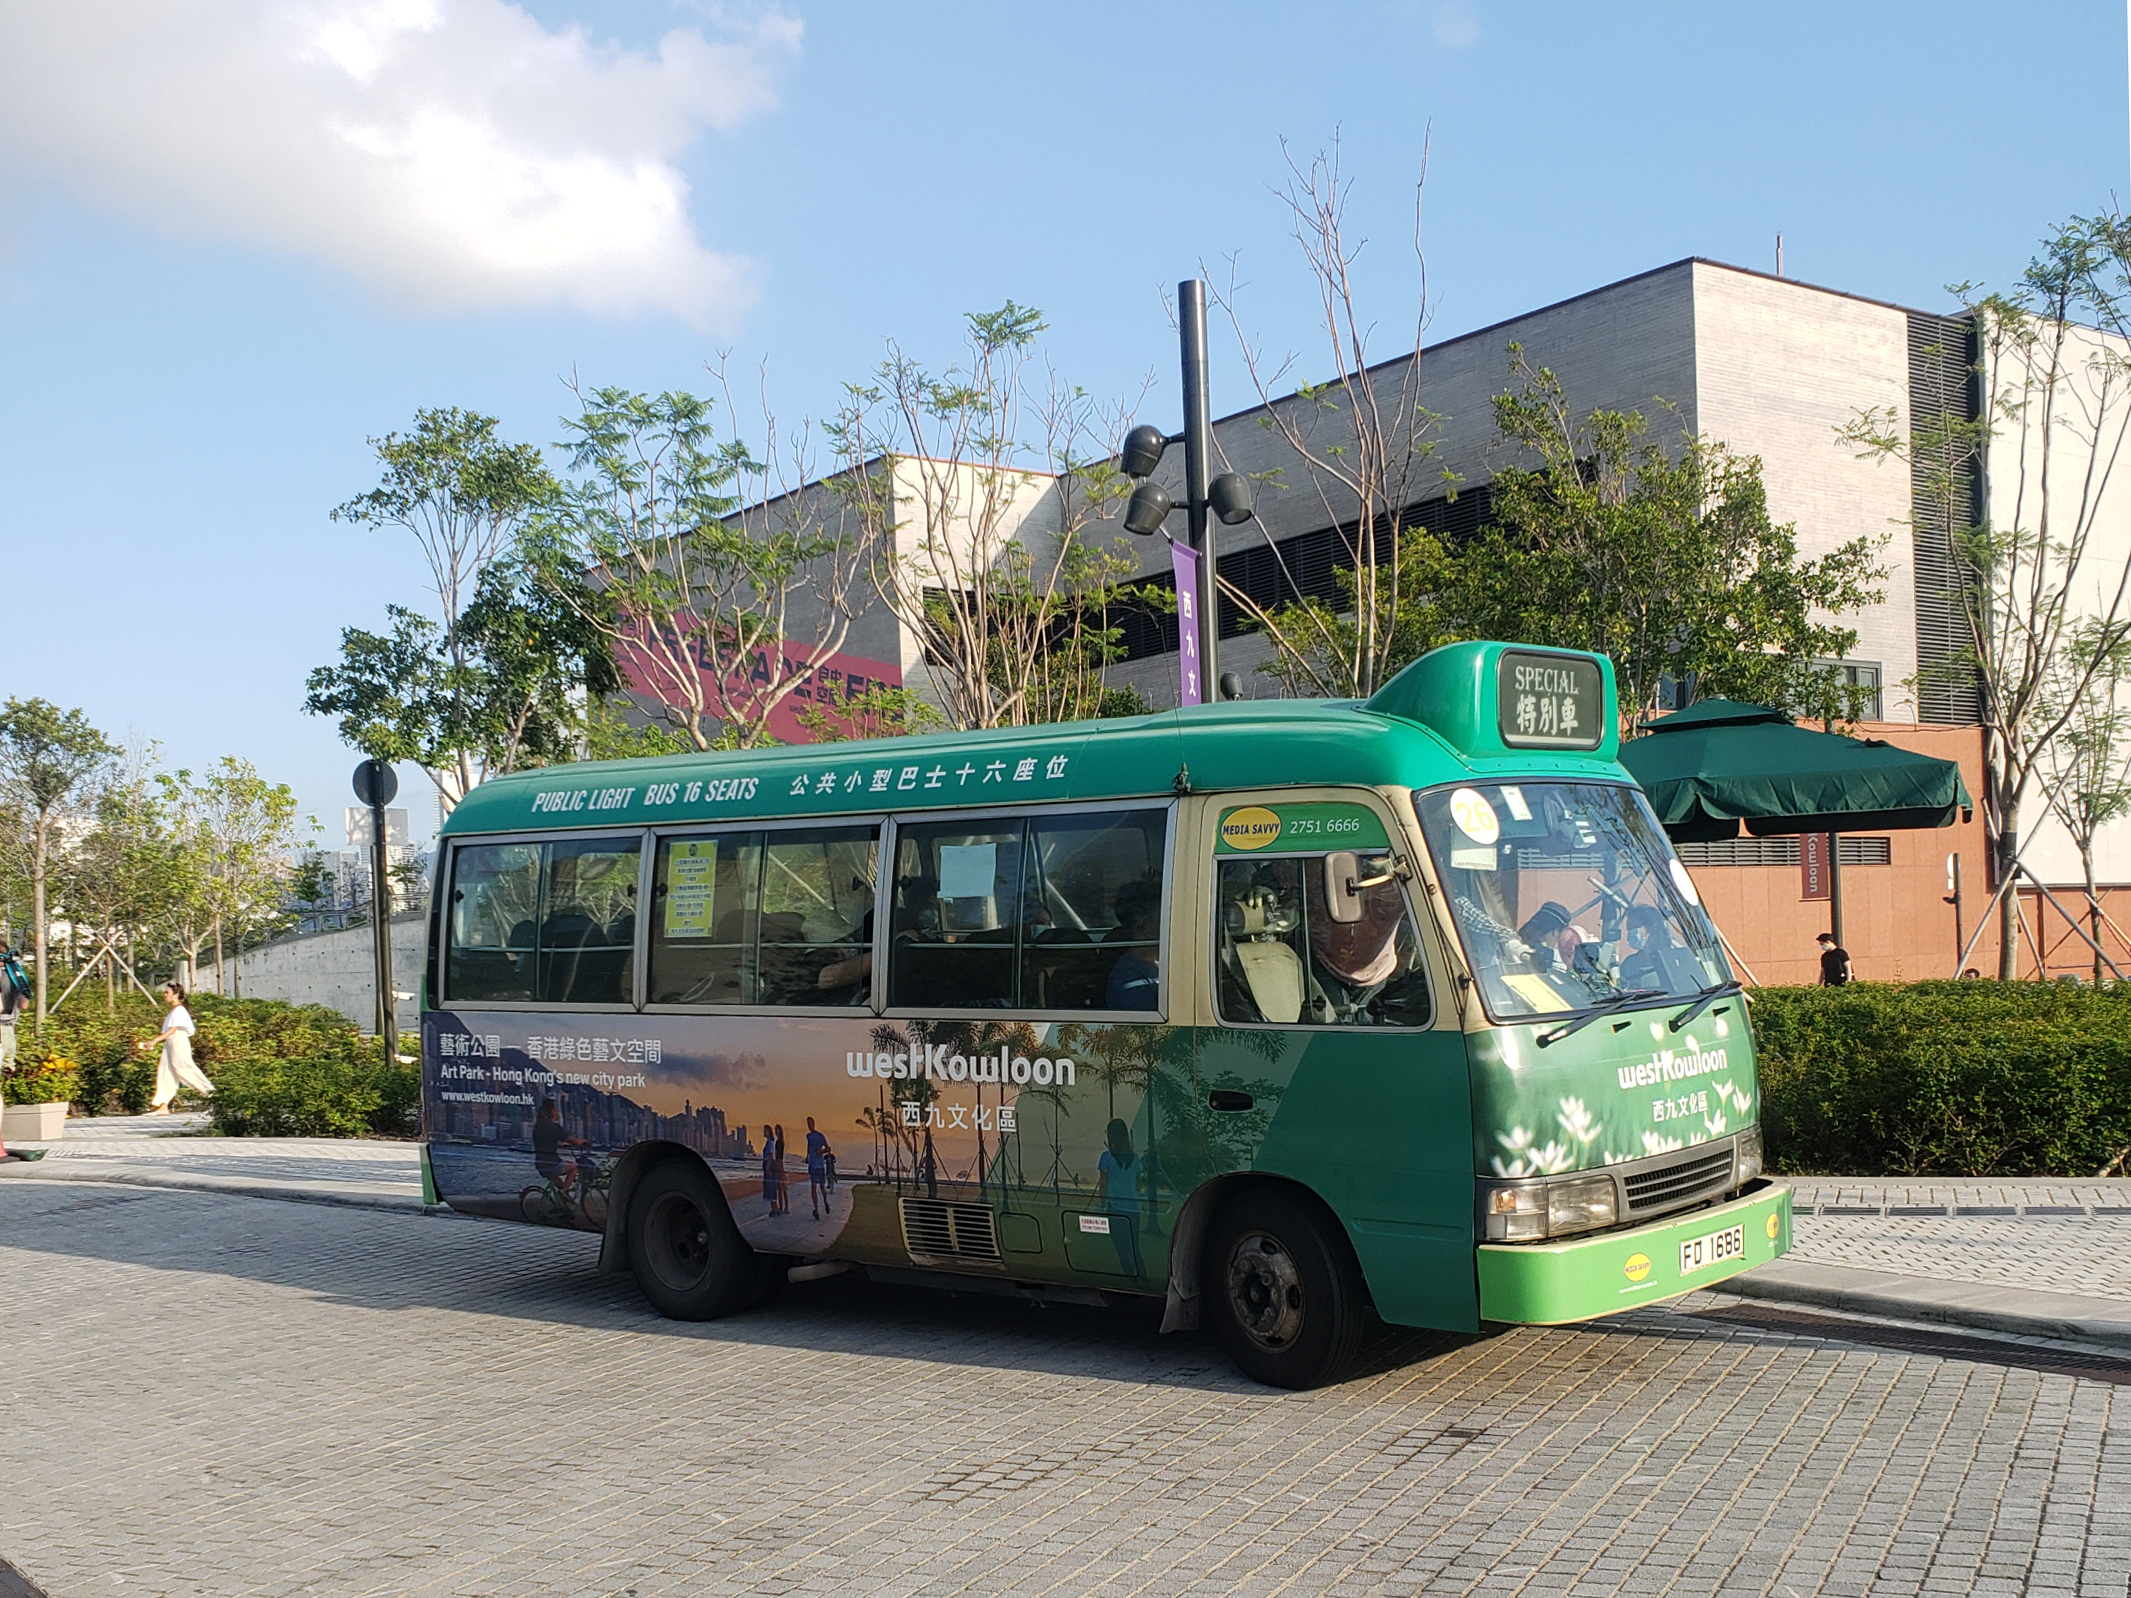 A dedicated minibus route takes you from the city centre to West Kowloon within minutes